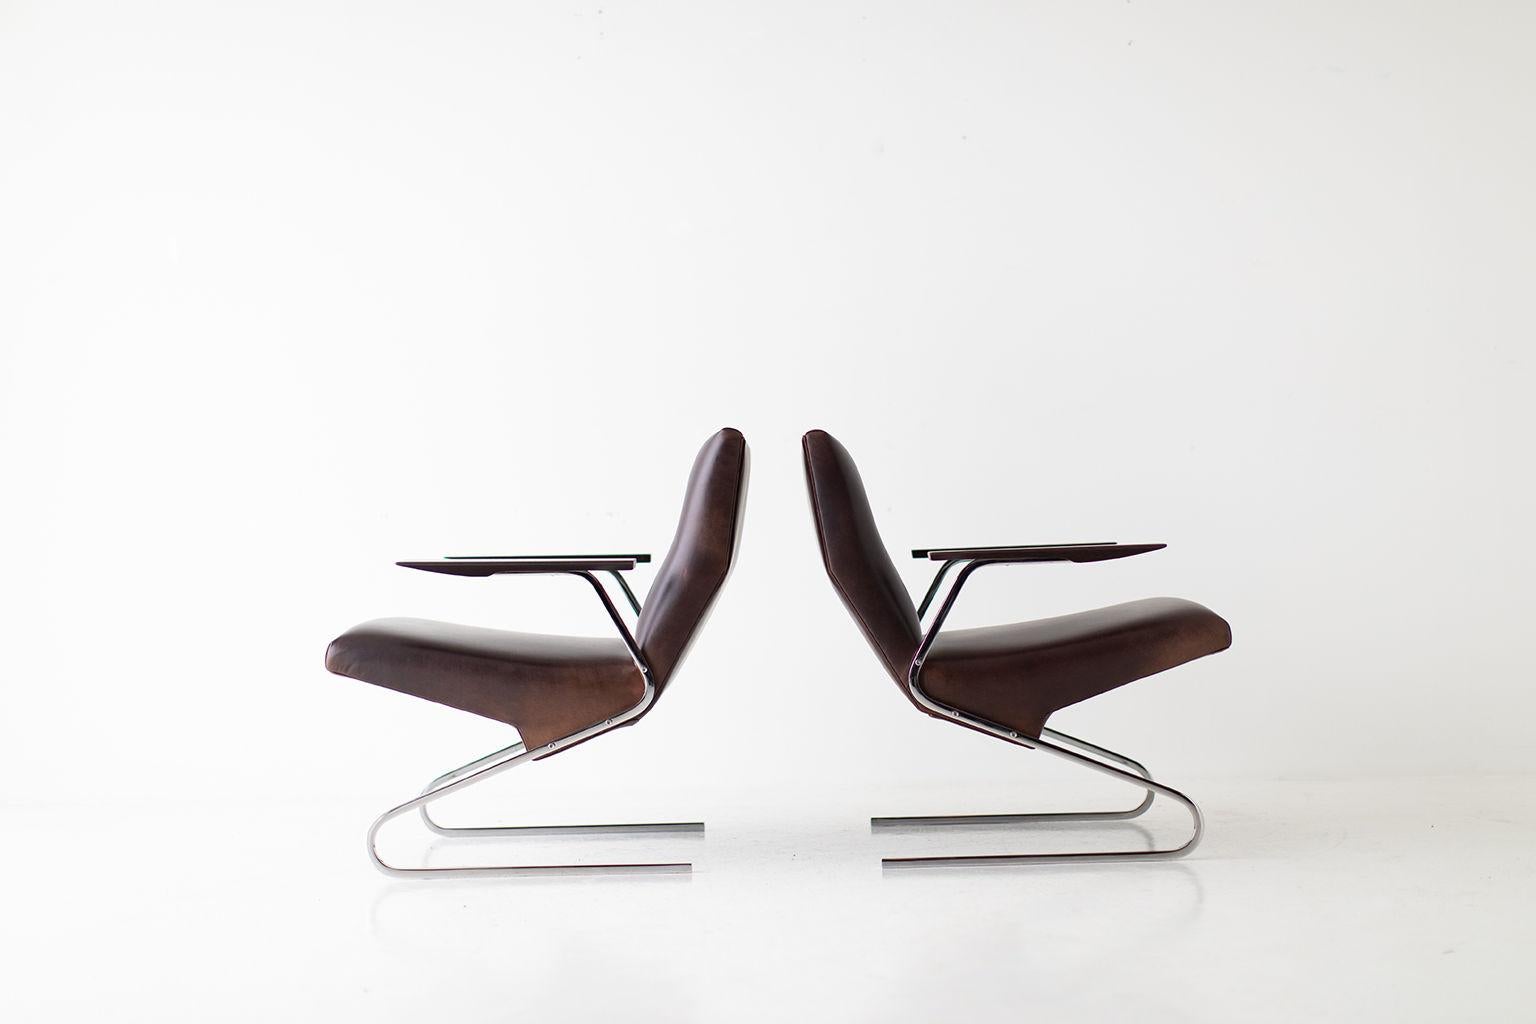 Designer: Georges Van Rijck.

Manufacturer: Beaufort.
Period/Model: Mid-Century Modern.
Specs: Chrome, leather, wood.

Condition:

These Georges Van Rijck leather lounge chairs for Beaufort are in excellent restored condition. The frames